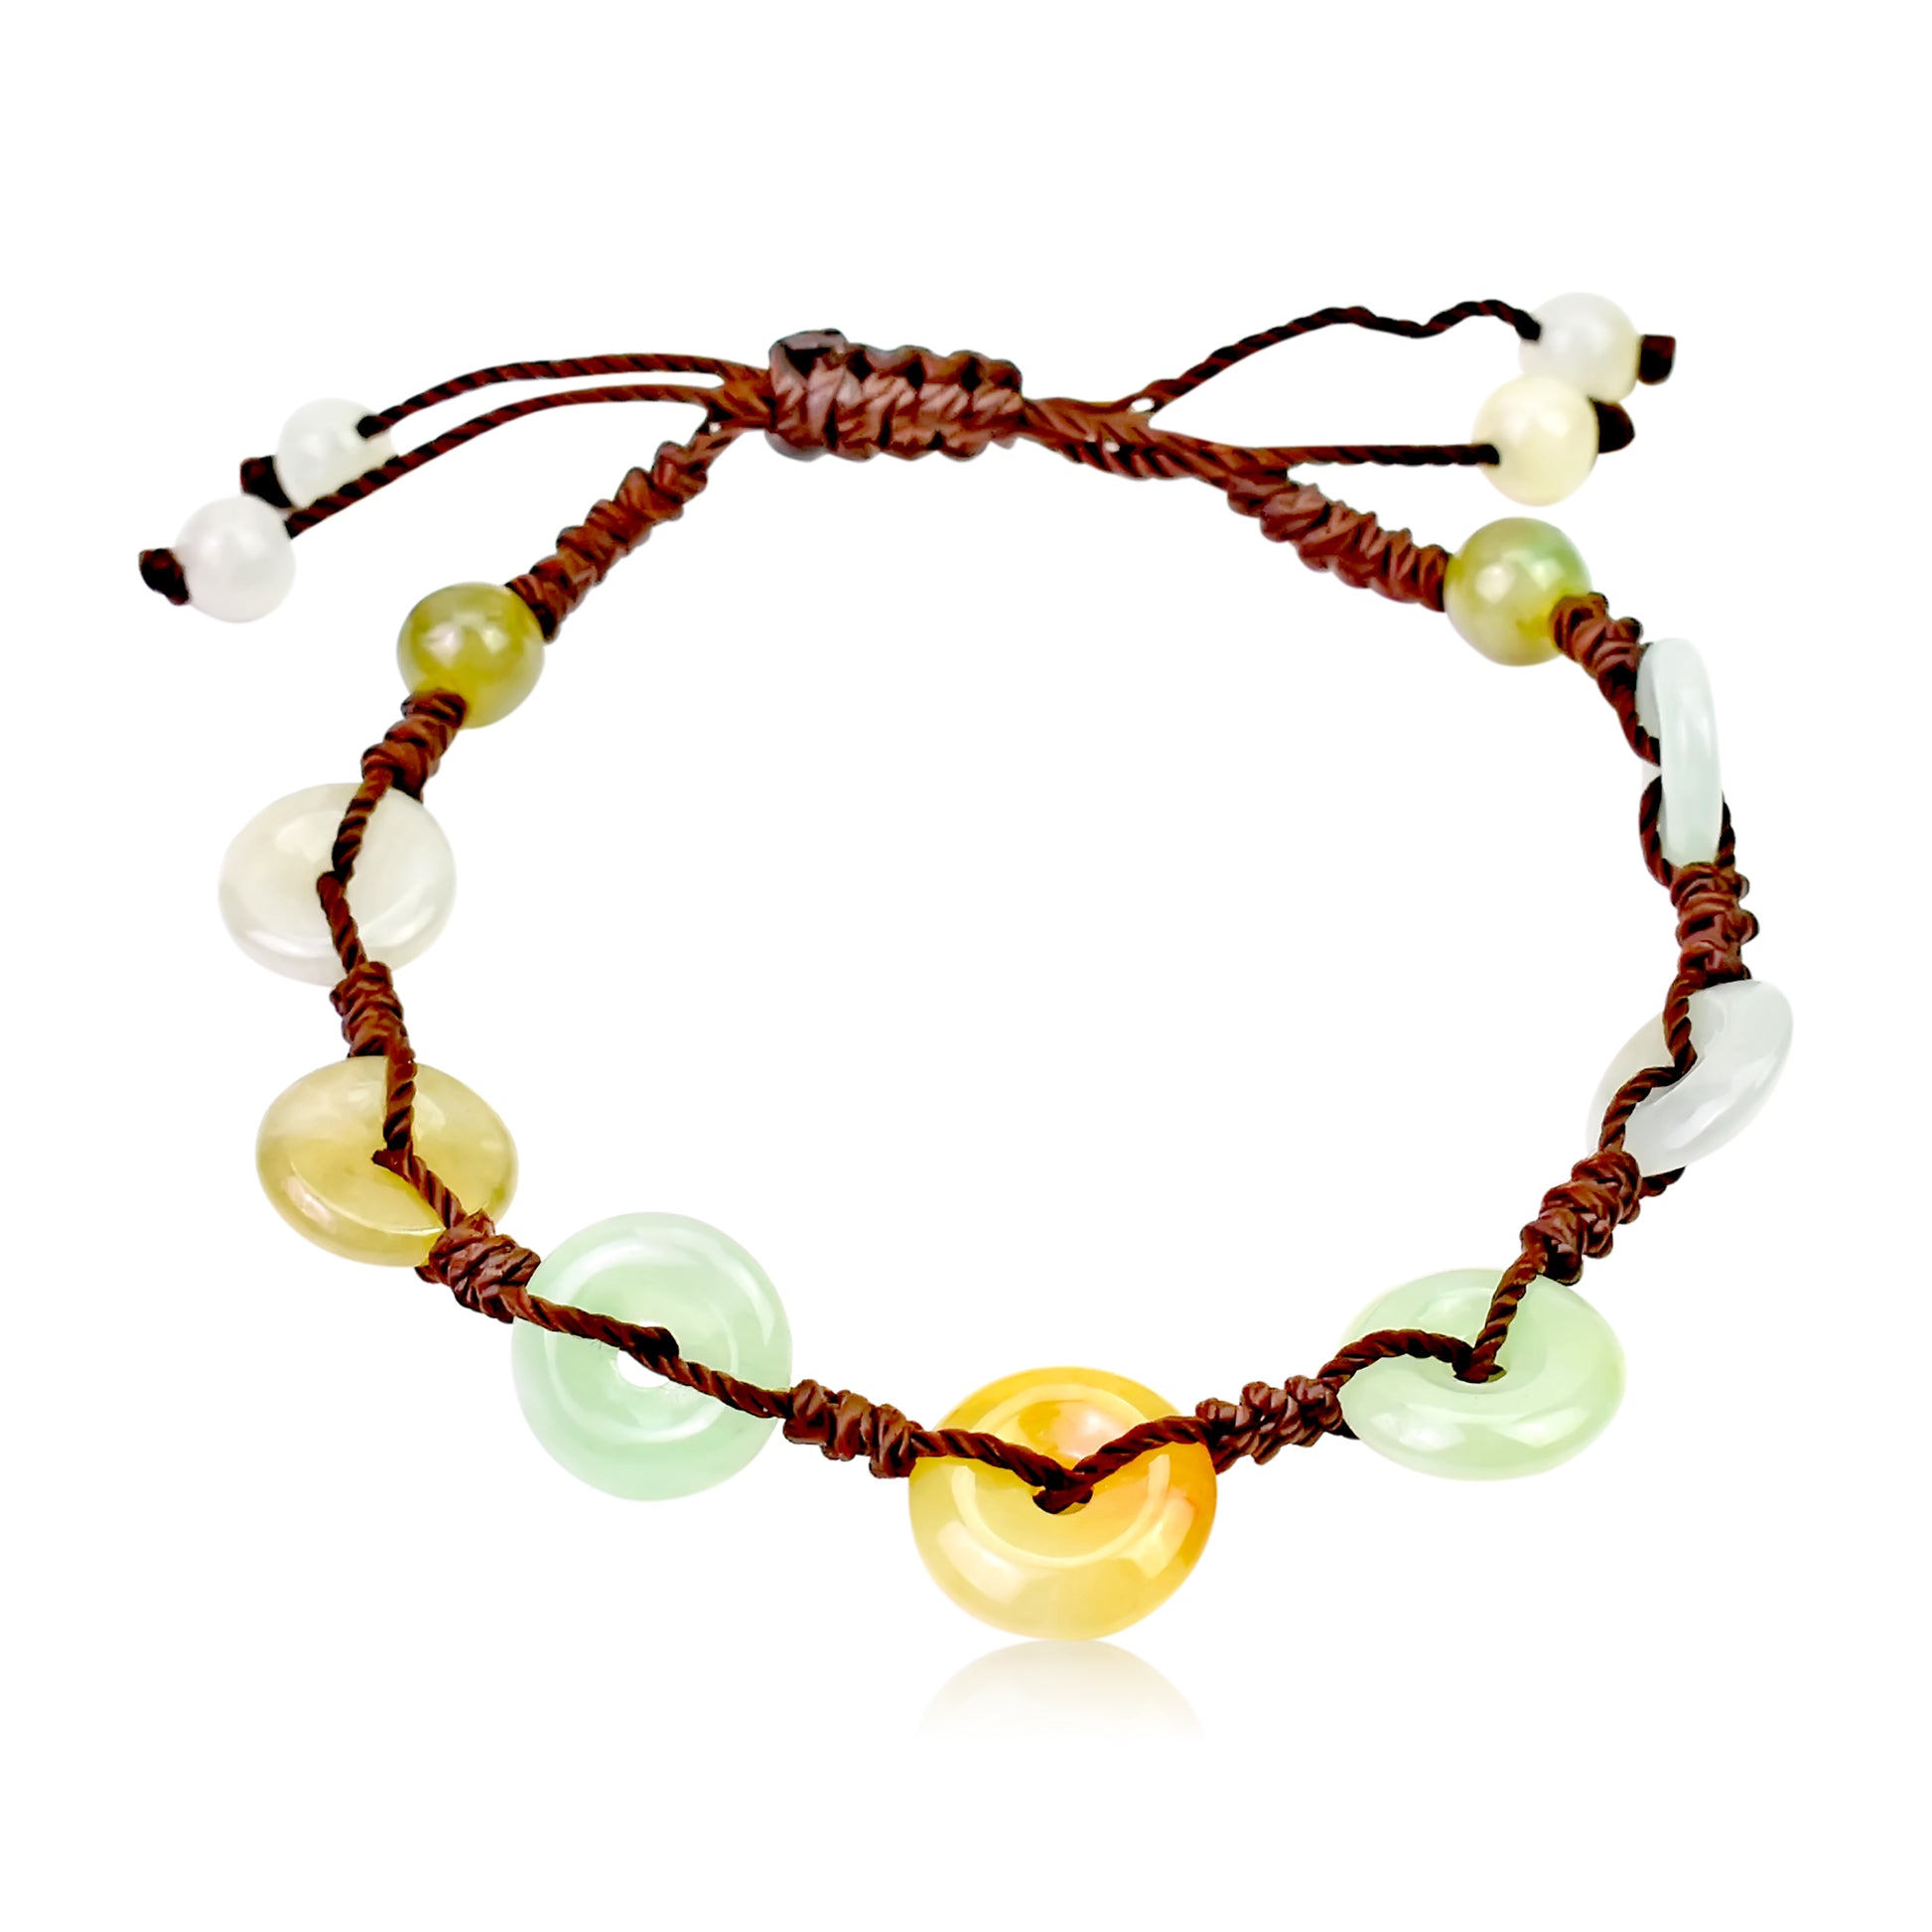 Radiate Good Energy with this Linear Eternity PI Handmade Jade Bracelet made with Brown Cord